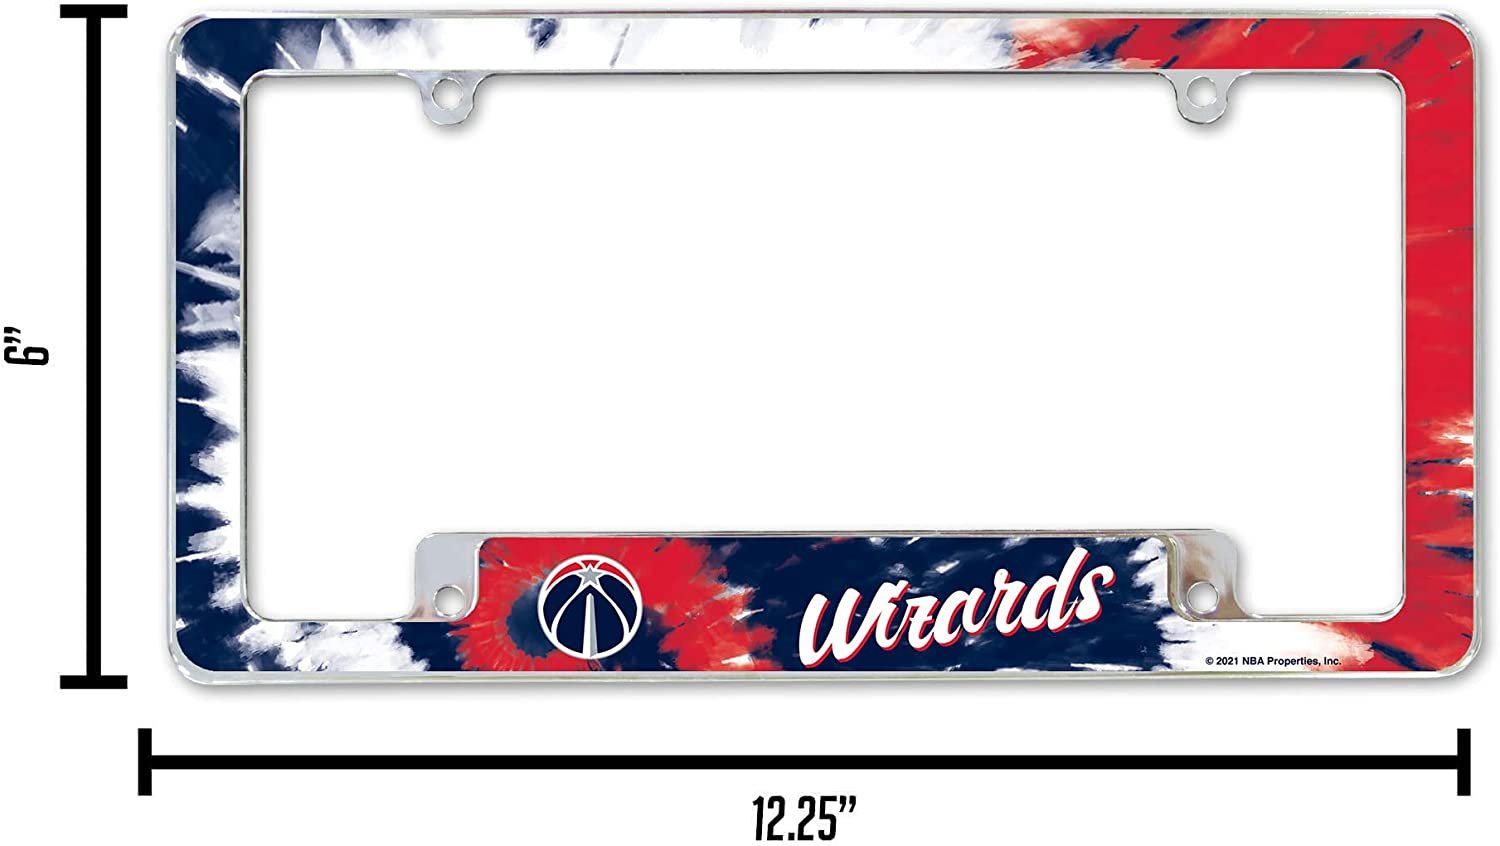 Washington Wizards Metal License Plate Frame Chrome Tag Cover Tie Dye Design 6x12 Inch